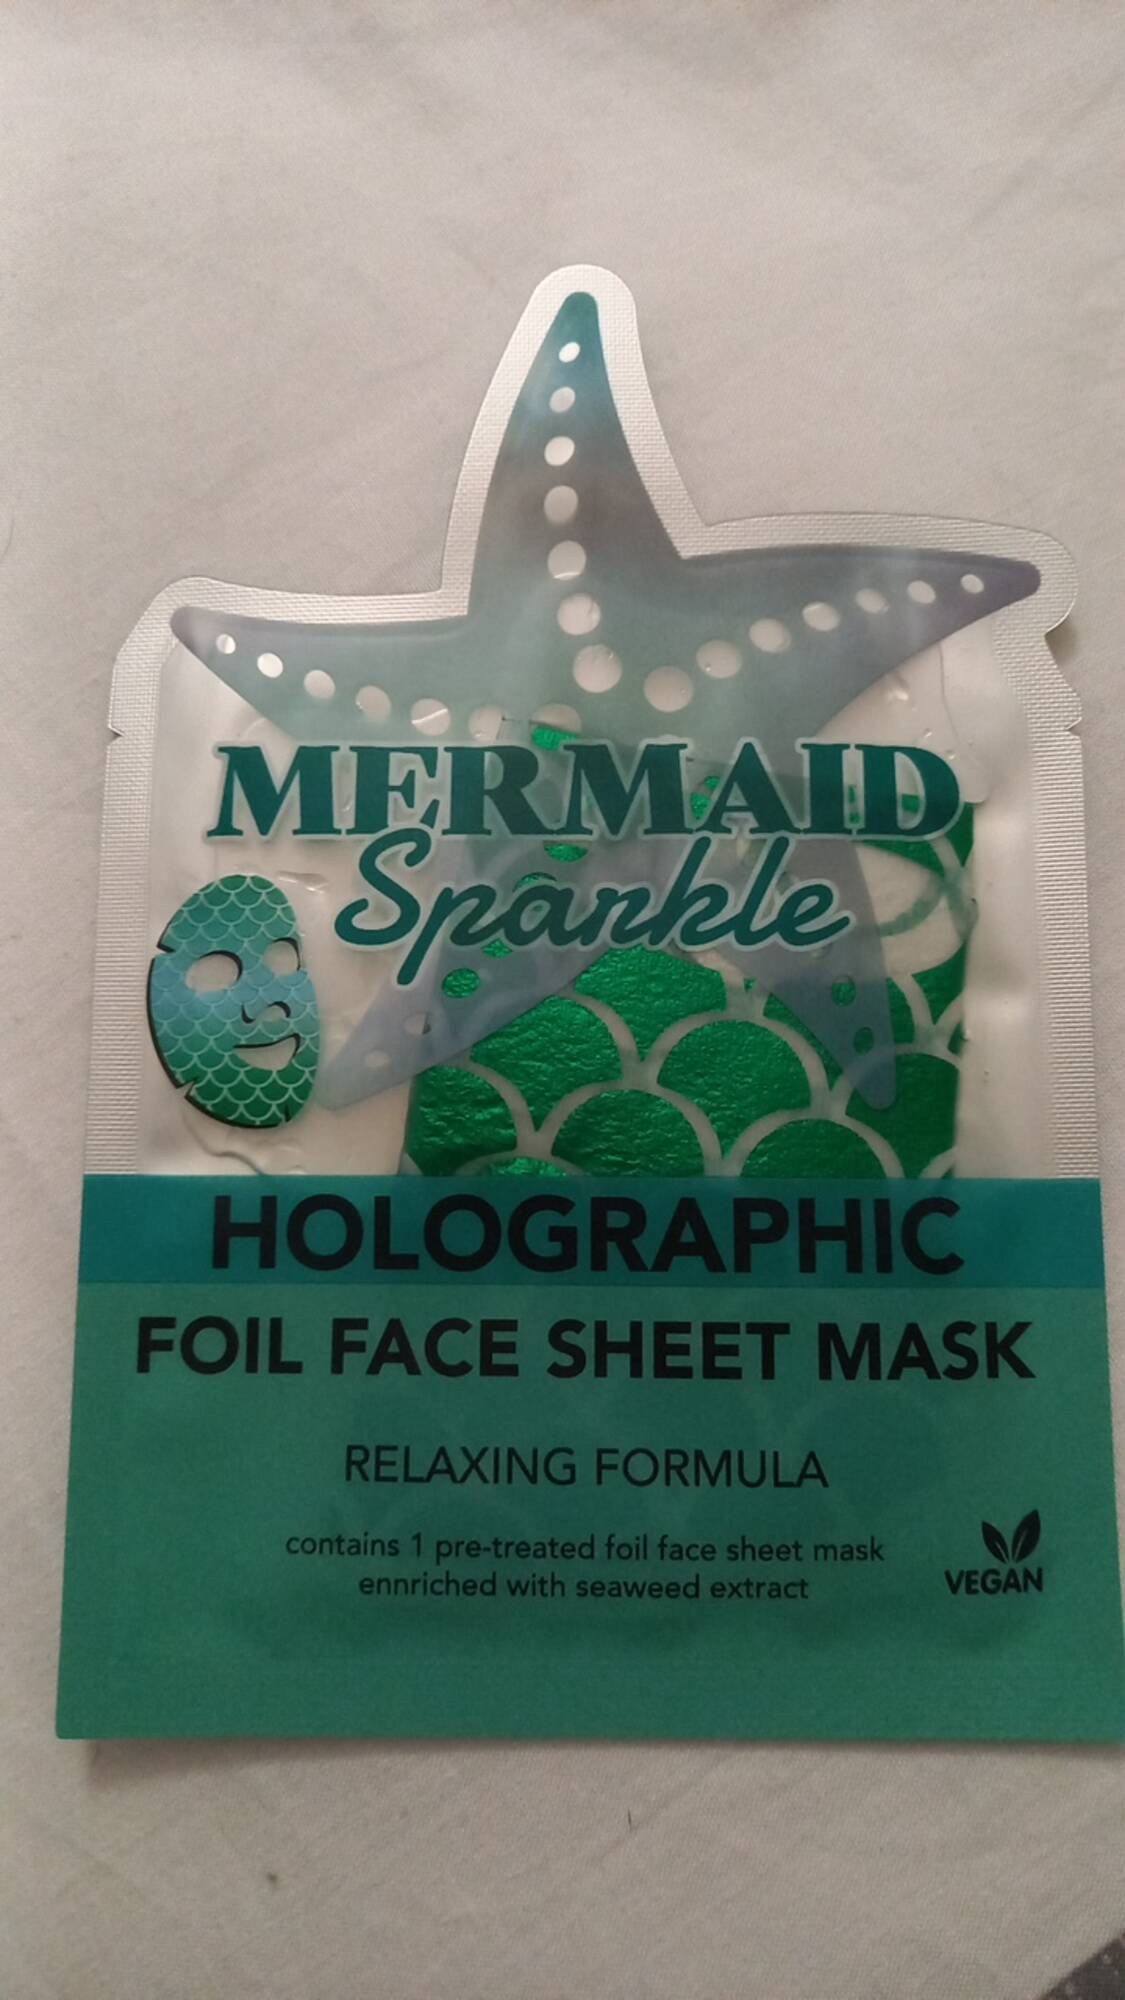 MAXBRANDS - Mermaid sparkle holographic - Foil face sheet mask